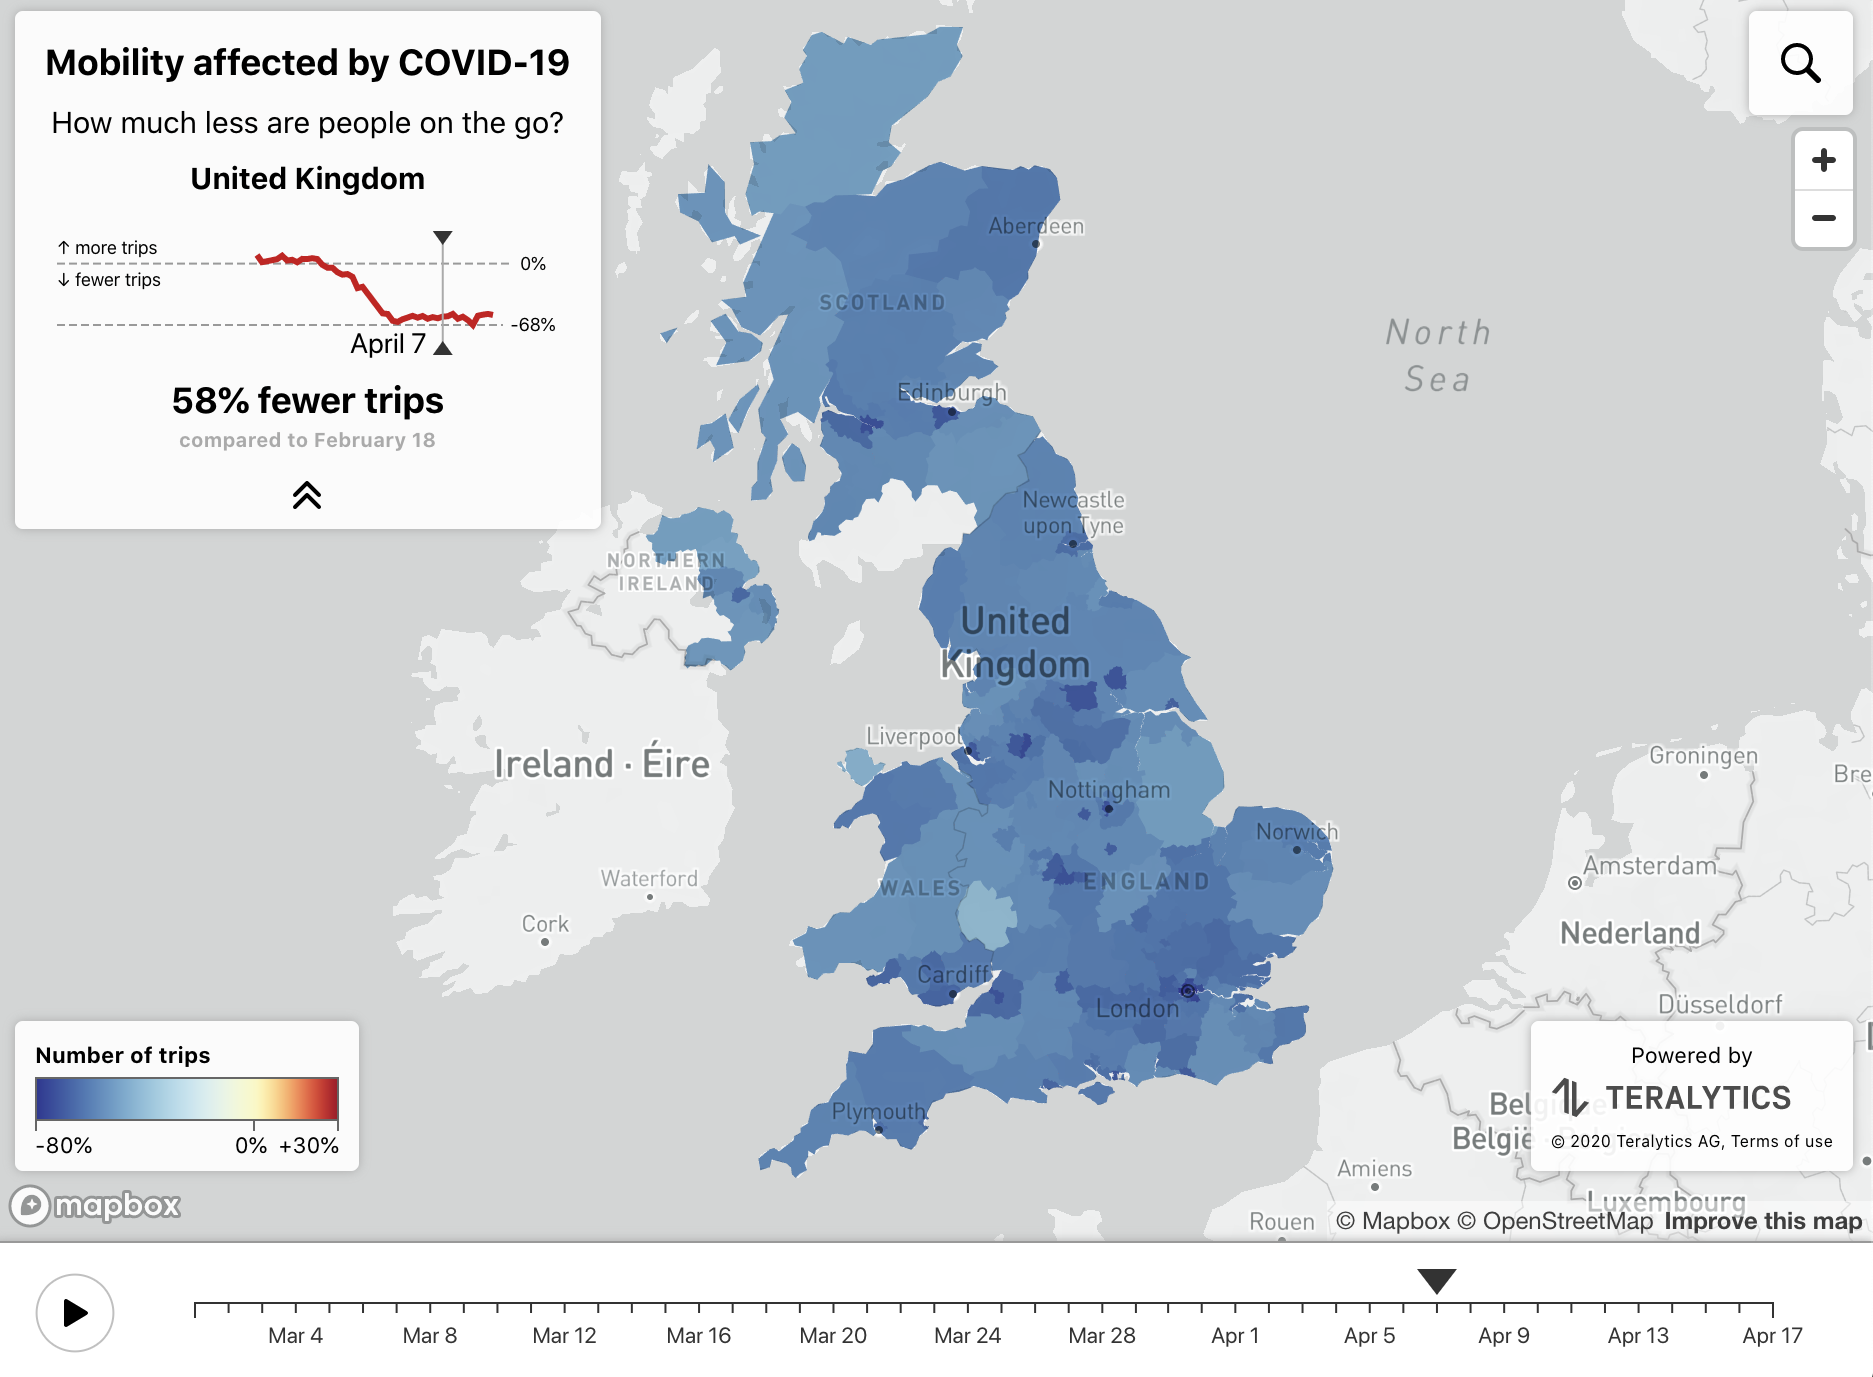 Effect of COVID-19 on mobility in United Kingdom